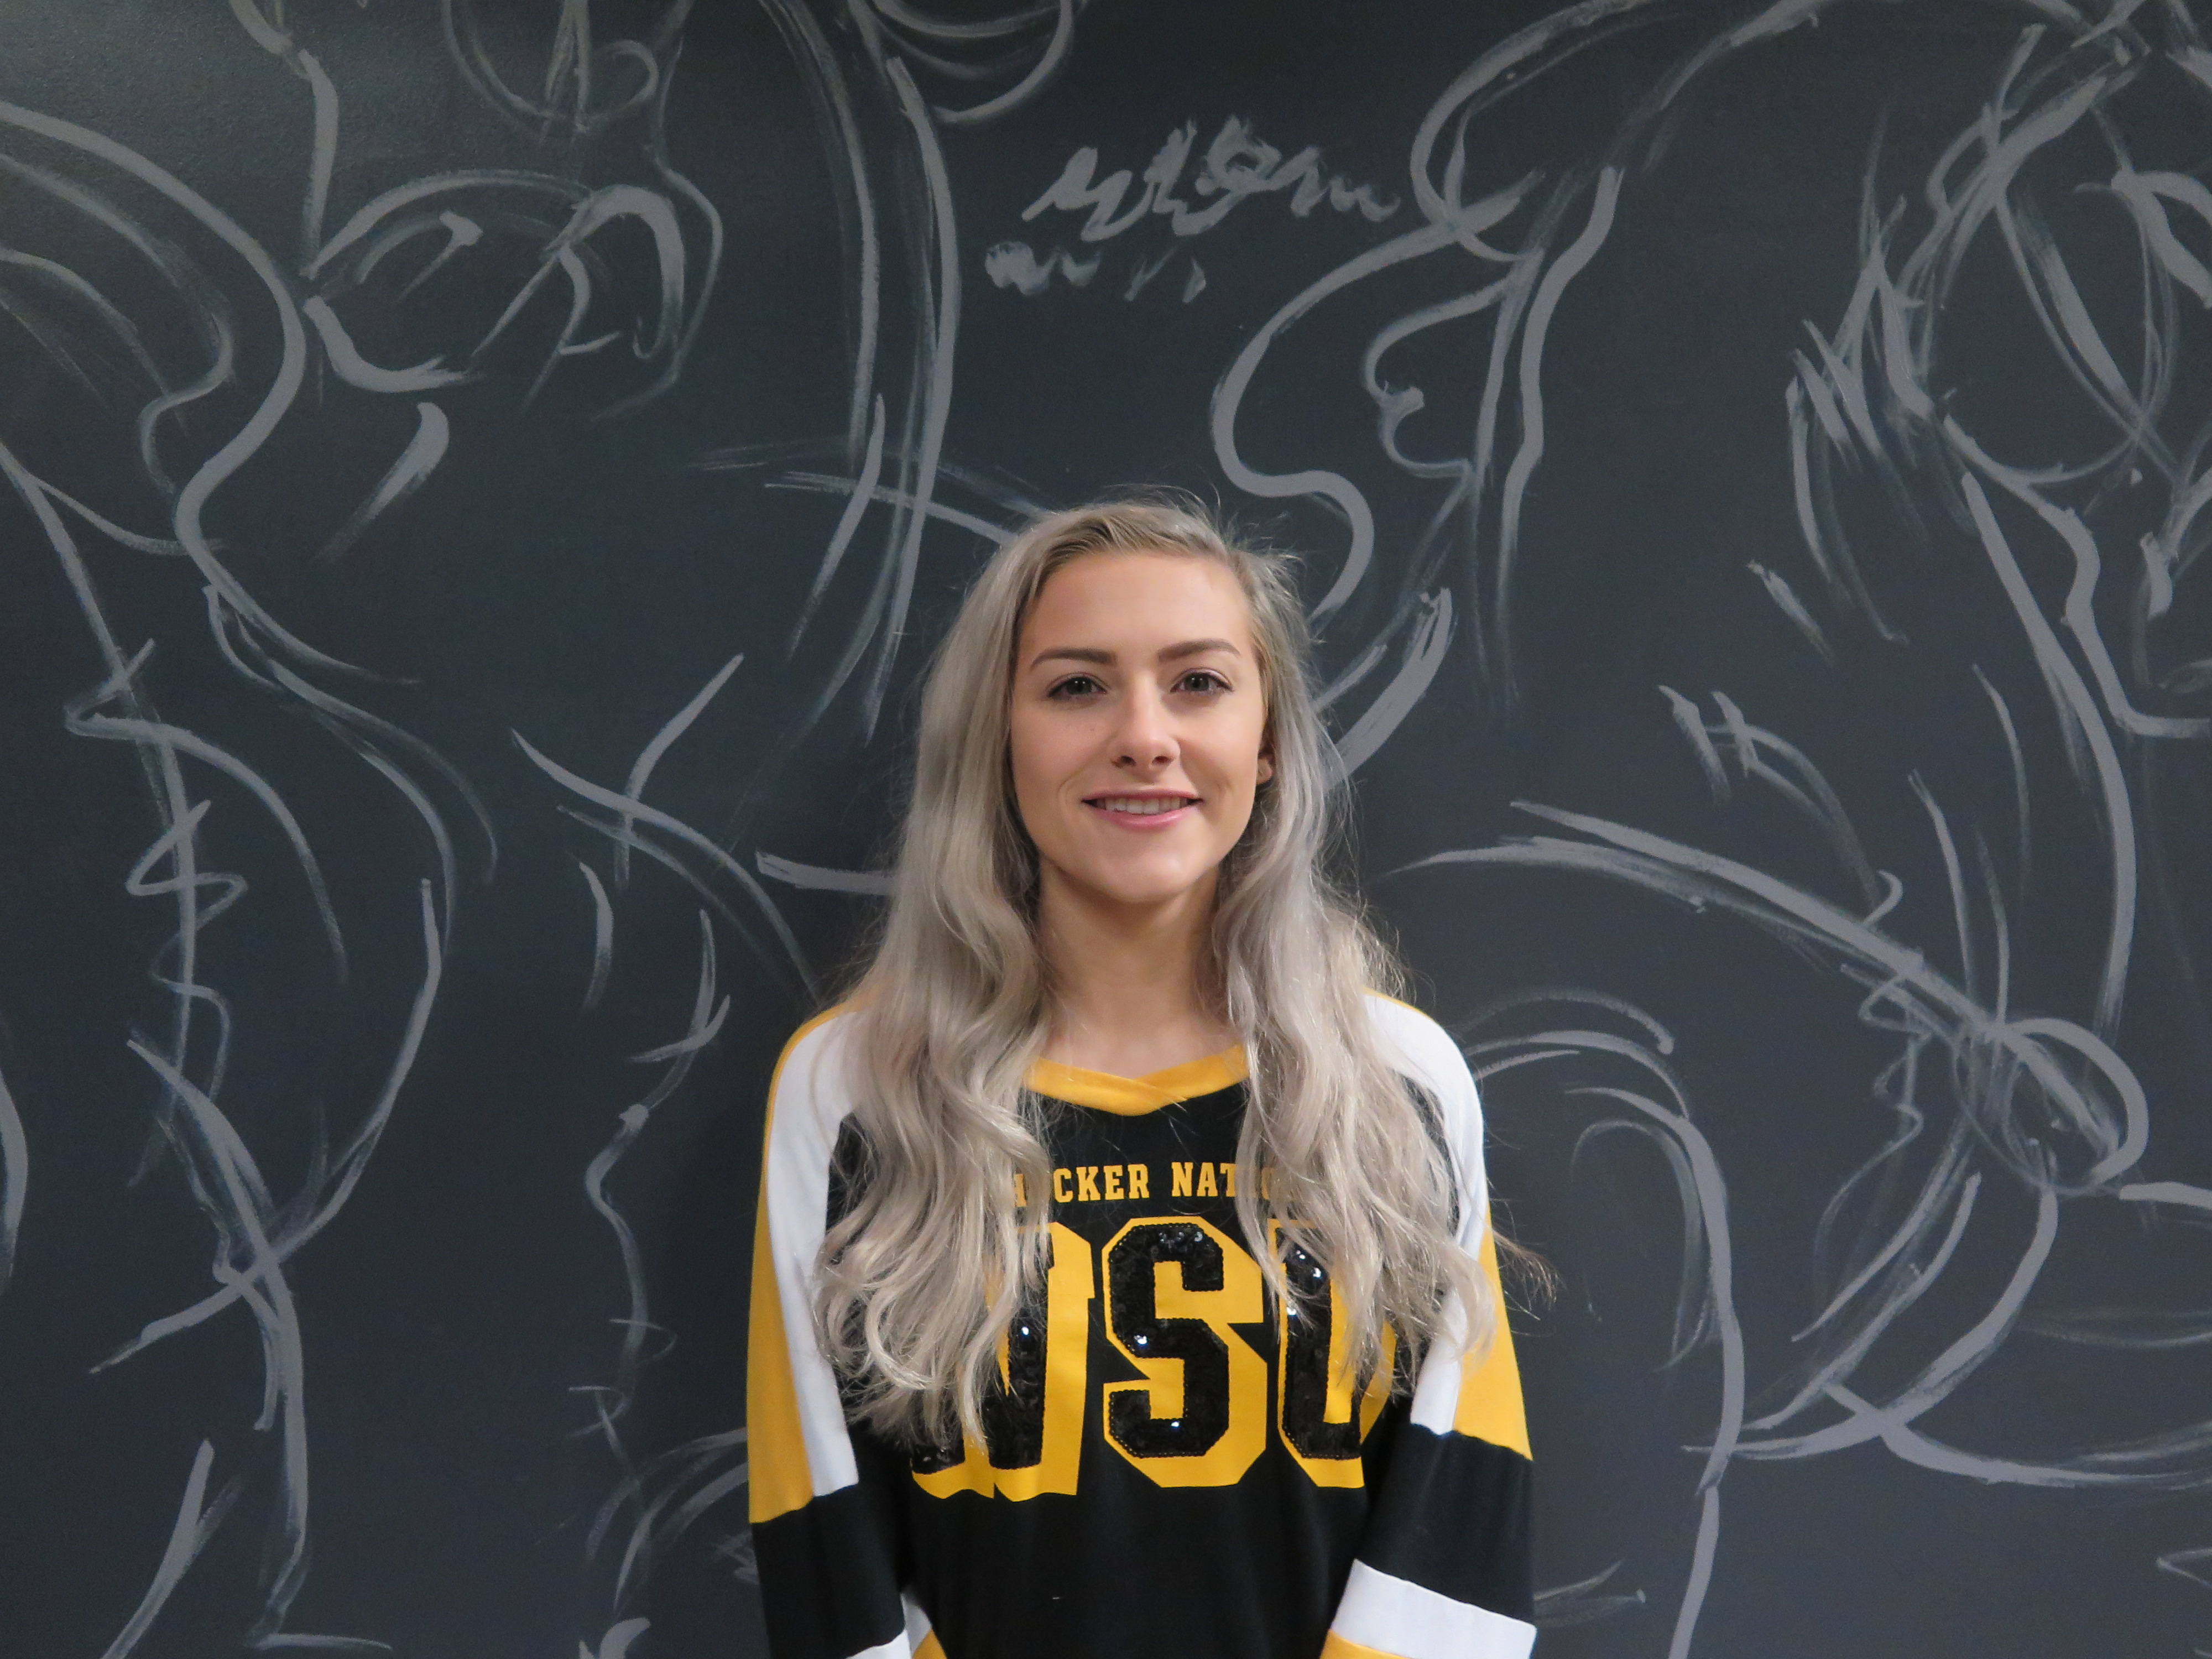 Michaela Marioni is a videogame design student at Wichita State University who got the chance of a lifetime to work on a background video for Snoop Dogg's tour.